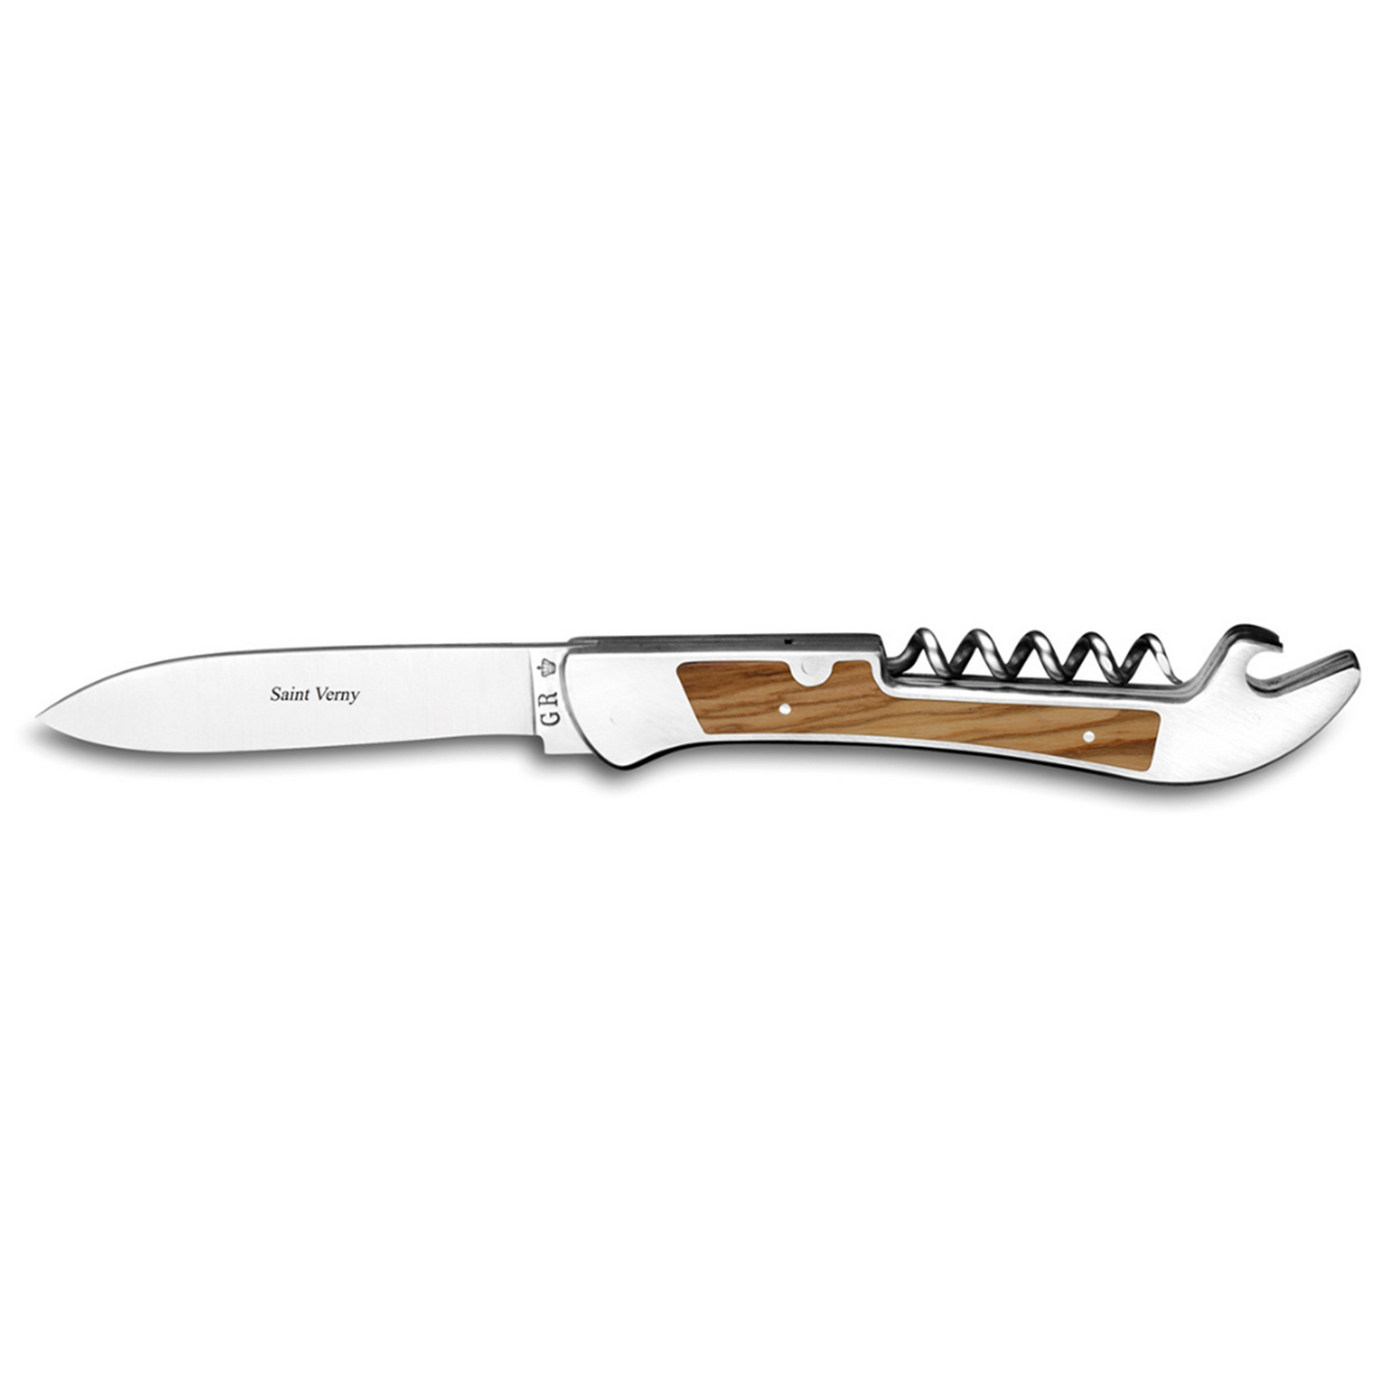 Thiers Issard The Saint Verny 11 cm Pocket Knife Olivewood